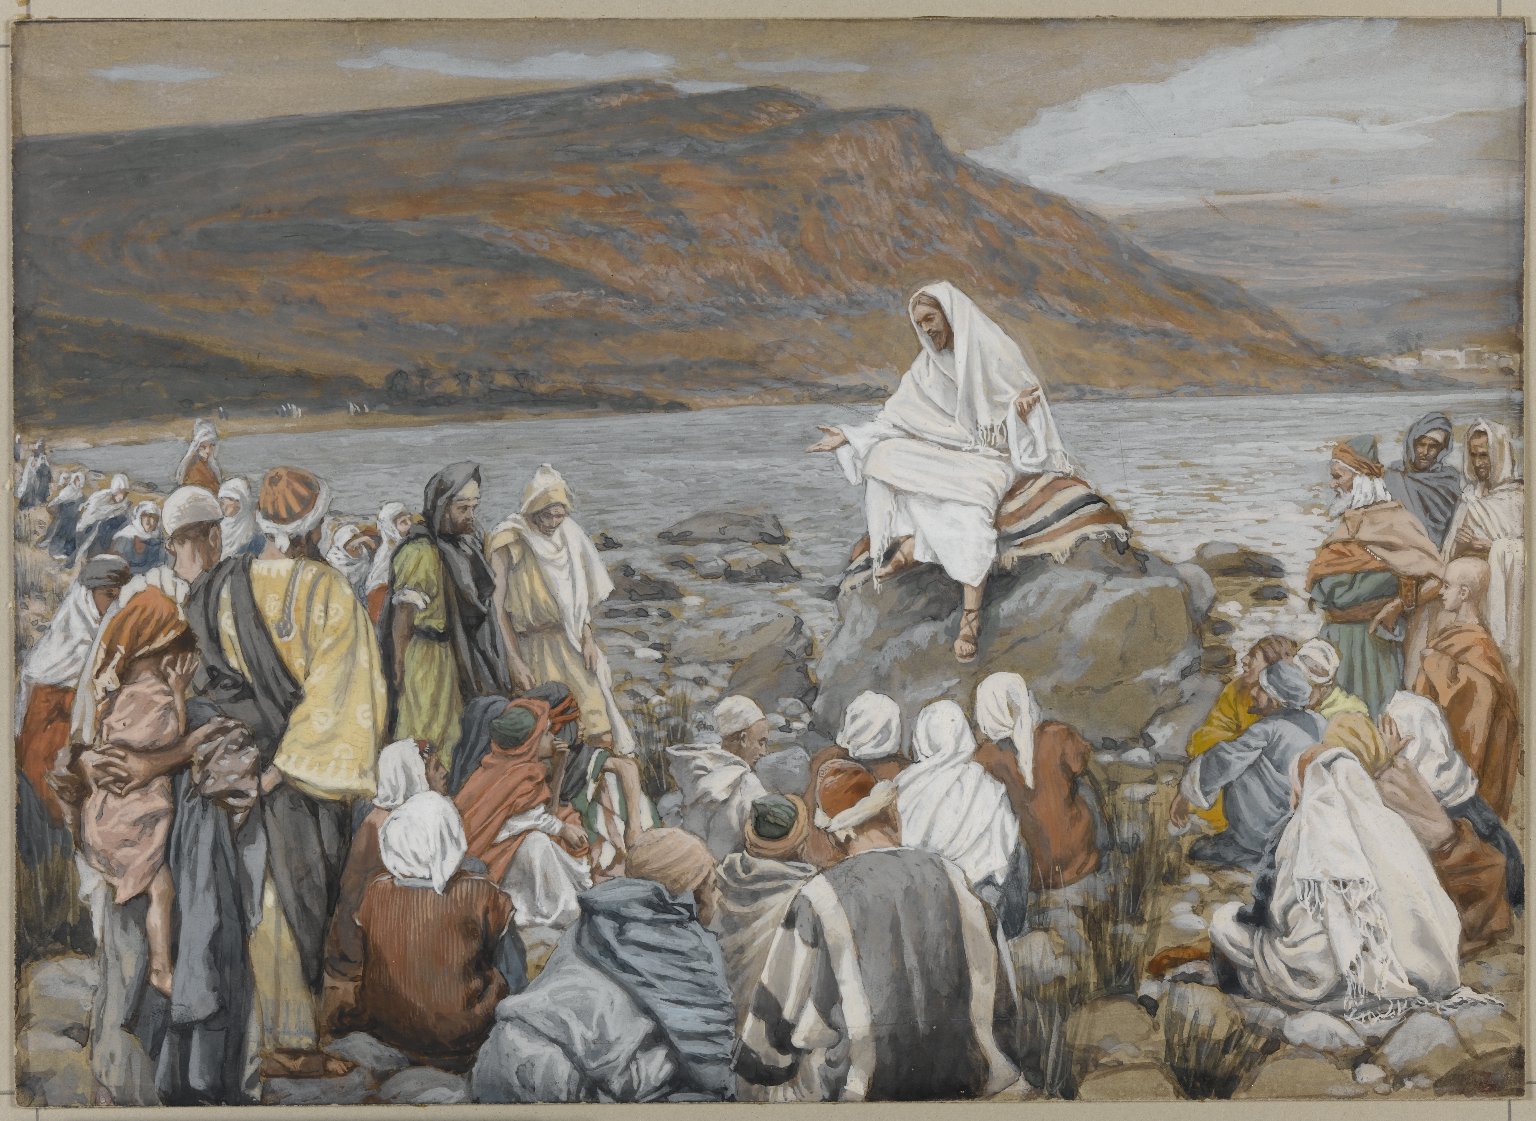 Jesus Teaches the People by the Sea, by James Tissot. If the Lord God really is working through the entire nation of Israel to bring redemption to every nation on earth, then the Gospel of the Kingdom is more than just personal salvation in Messiah. It is nothing less than the restoration and reunification of Judah and Ephraim under the reign of Messiah Son of David.